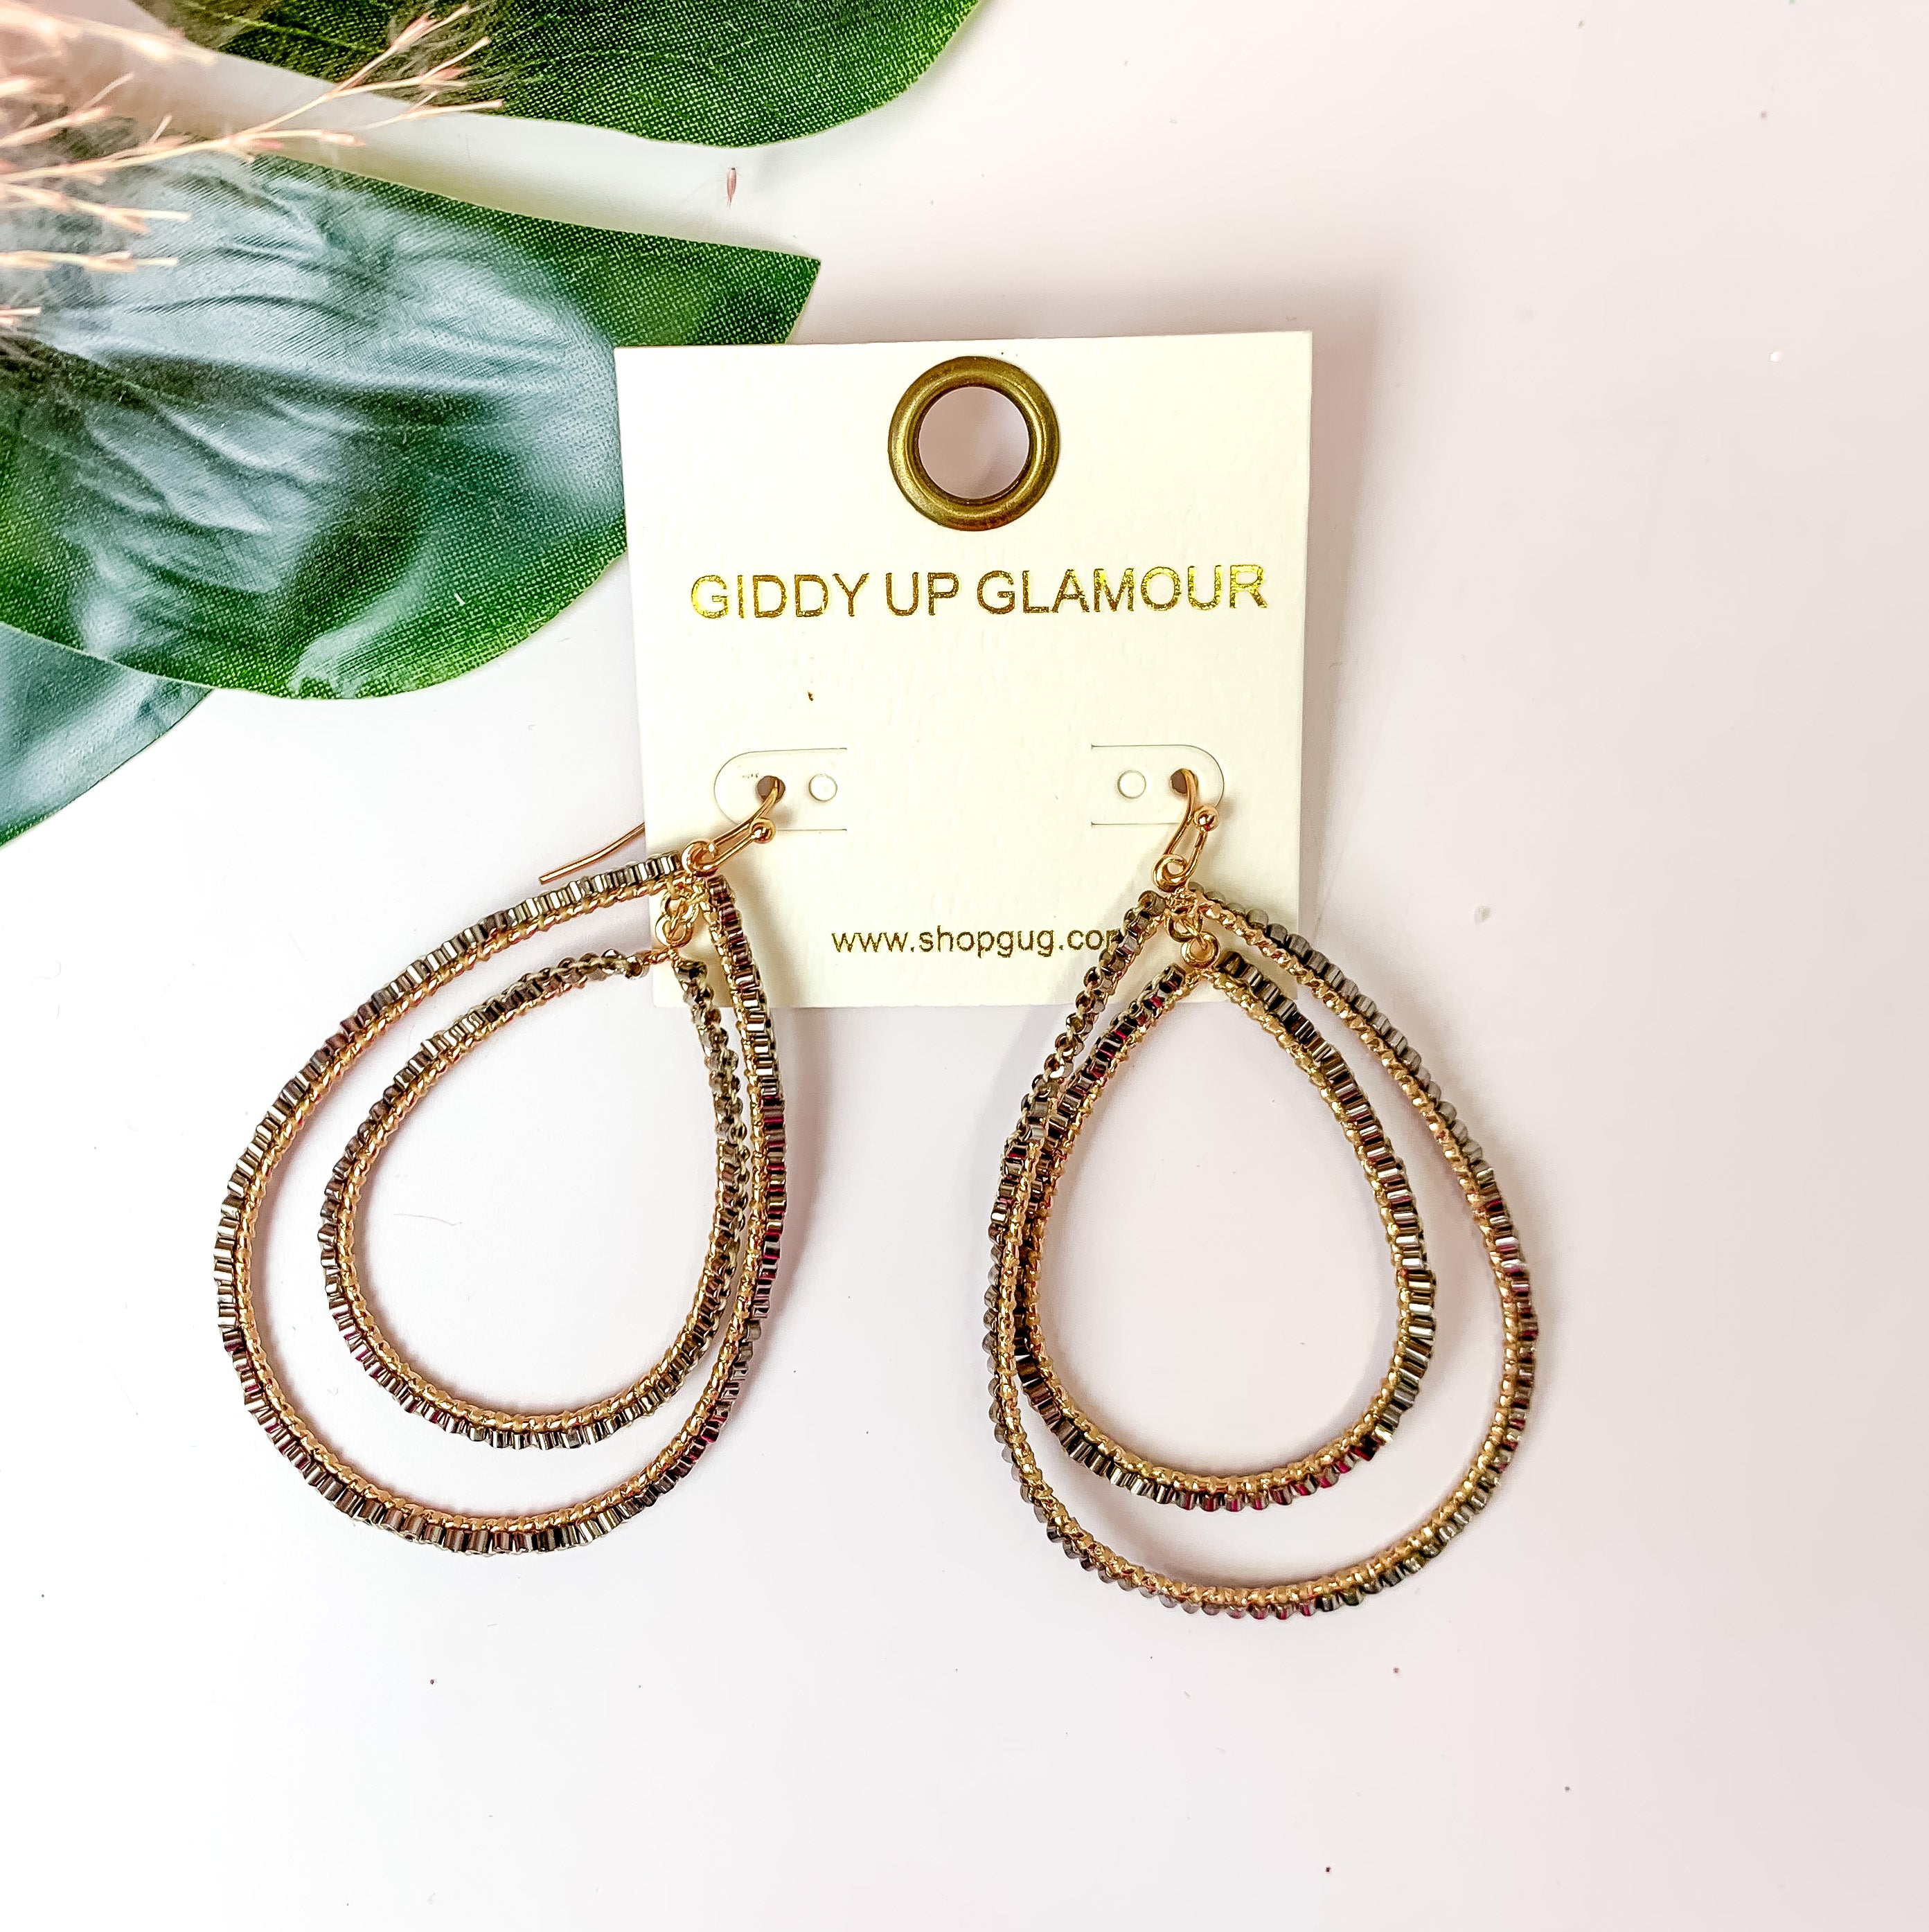 Double Open Teardrop Gold Tone Earrings with Beaded Outline in Charcoal. Pictured on a white background with plants in the top left corner.